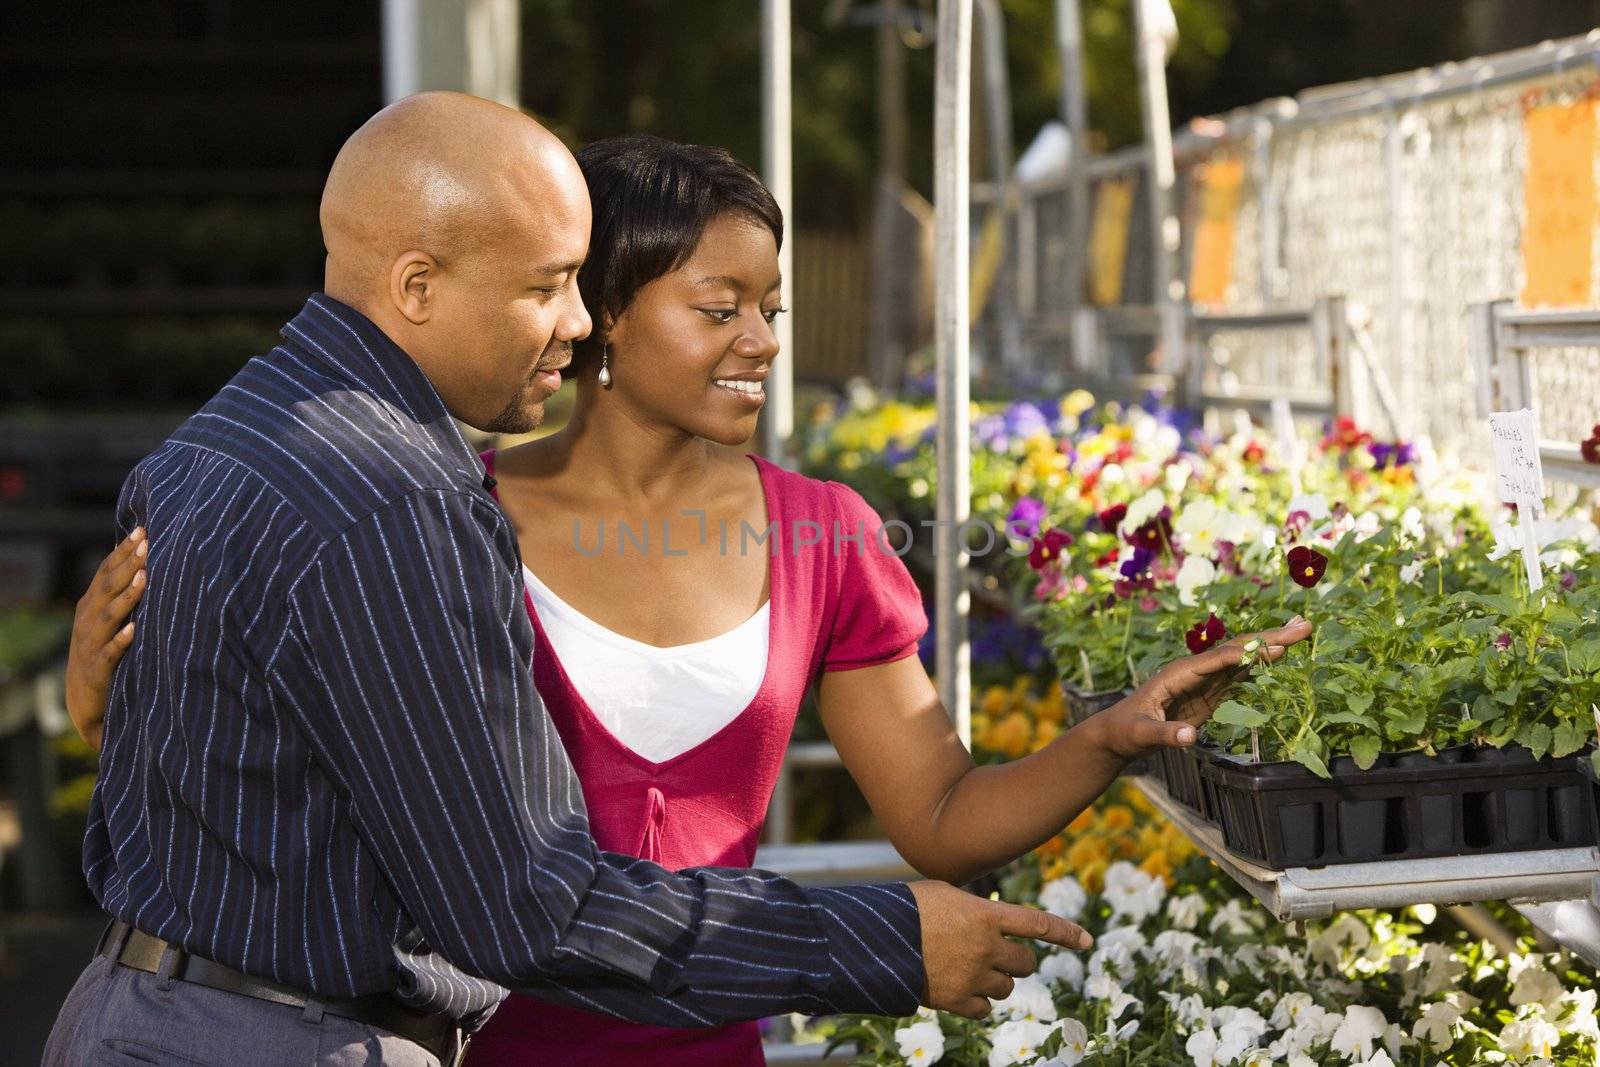 Happy smiling couple picking out flowers at outdoor plant market.